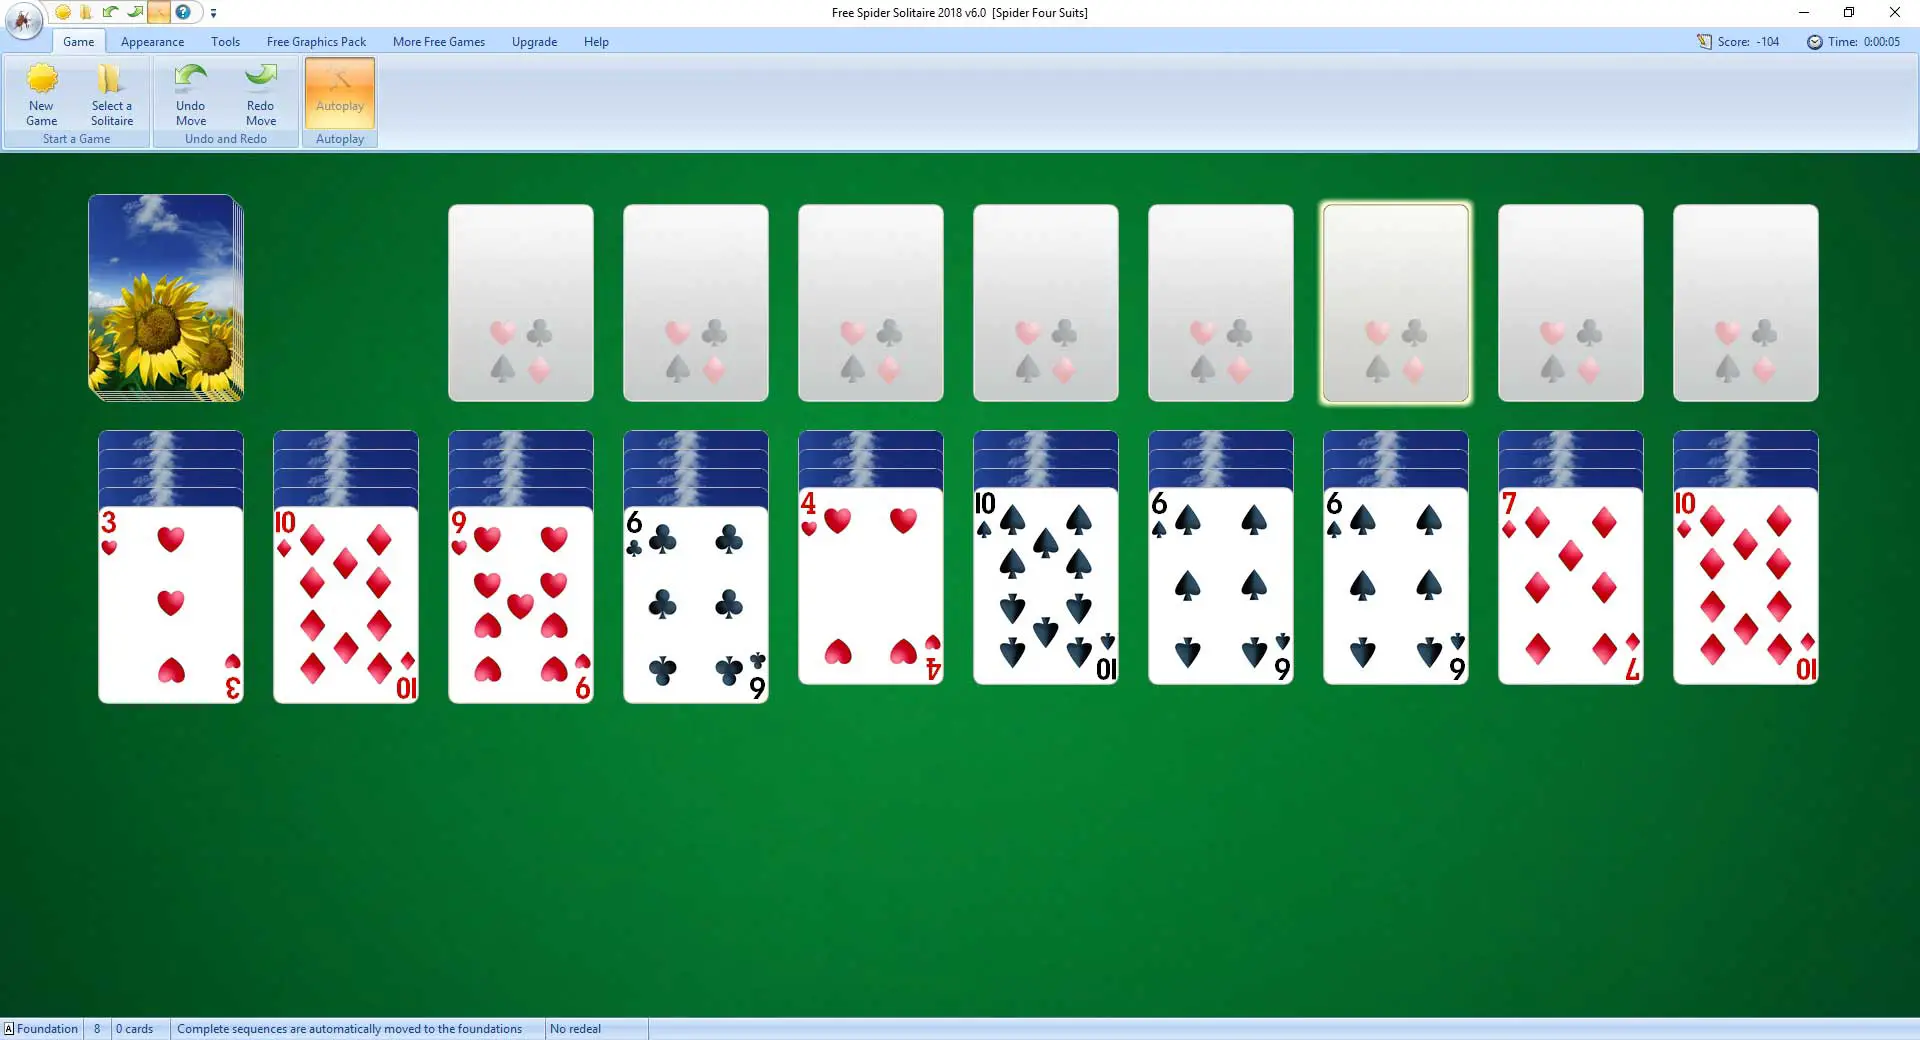 i want to play spider solitaire free